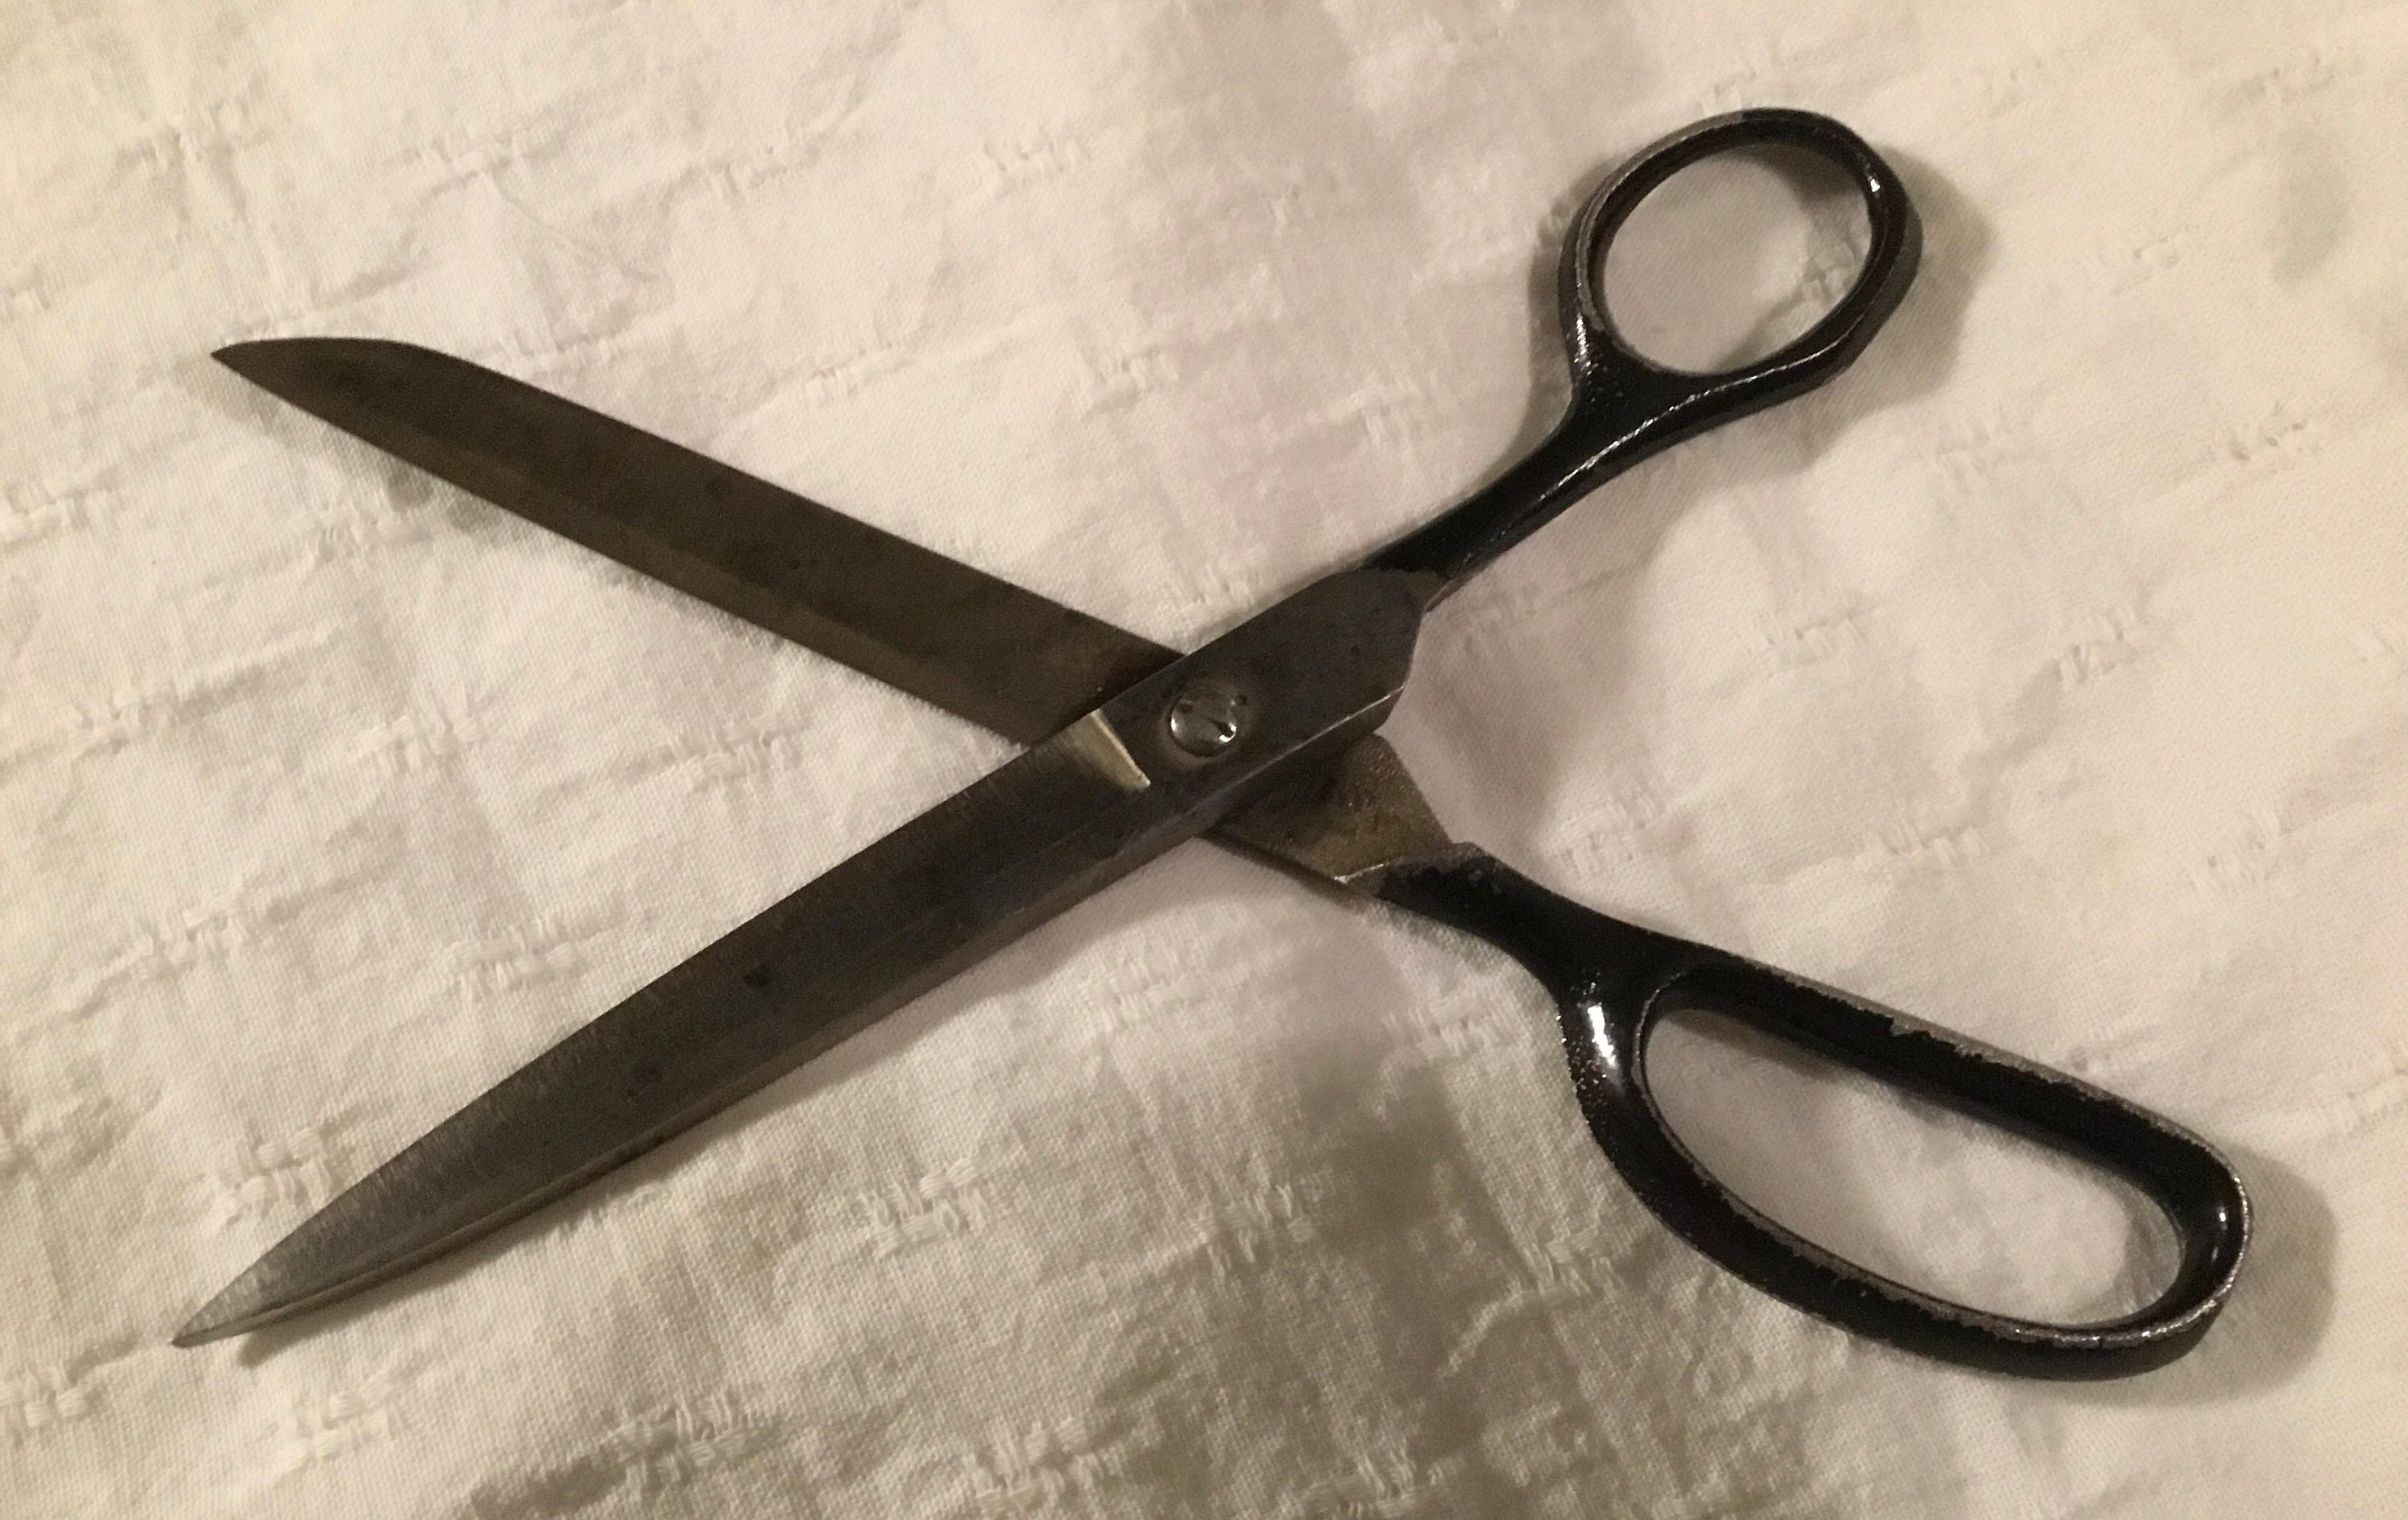 8.25 Left-Handed Fabric, Dressmaking, Sewing Shears - Tenartis 555 Made in Italy